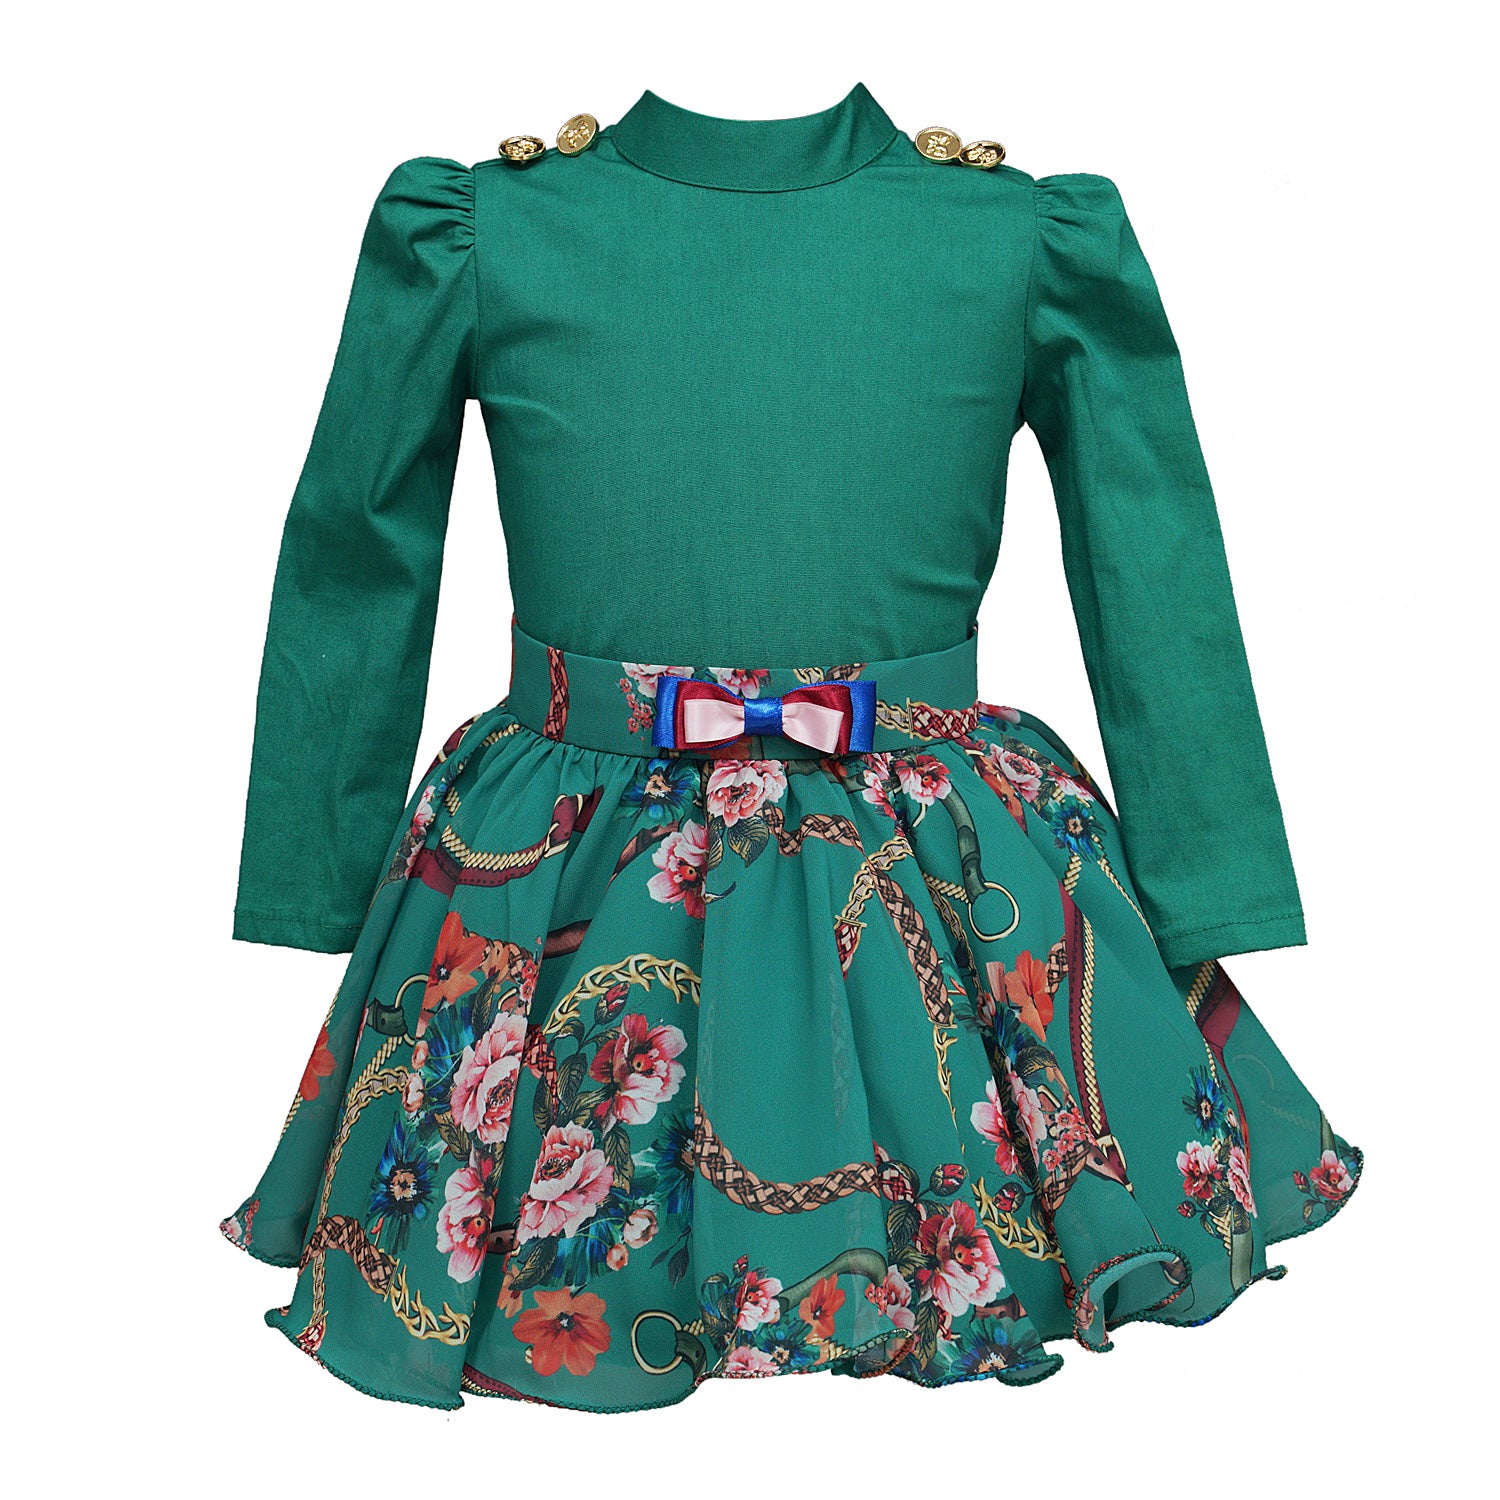 Green Dragonfly Co-ord Skirt Set - The Pony & Peony Co.